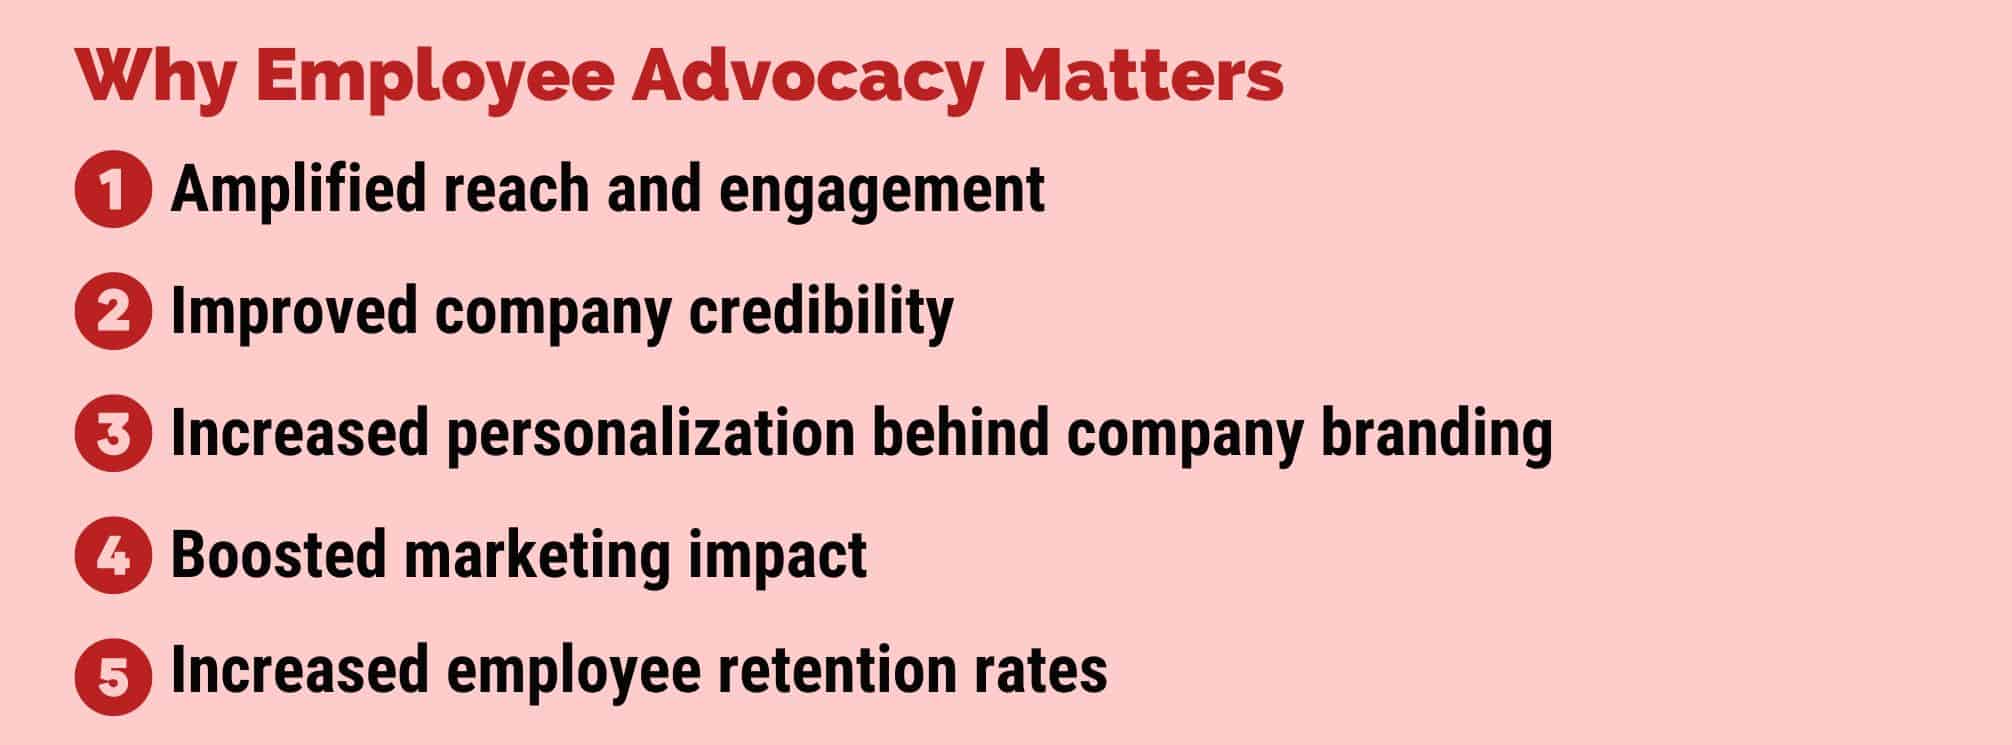 text-based graphic that says "why employee advocacy matters" and lists the 5 points from the blog